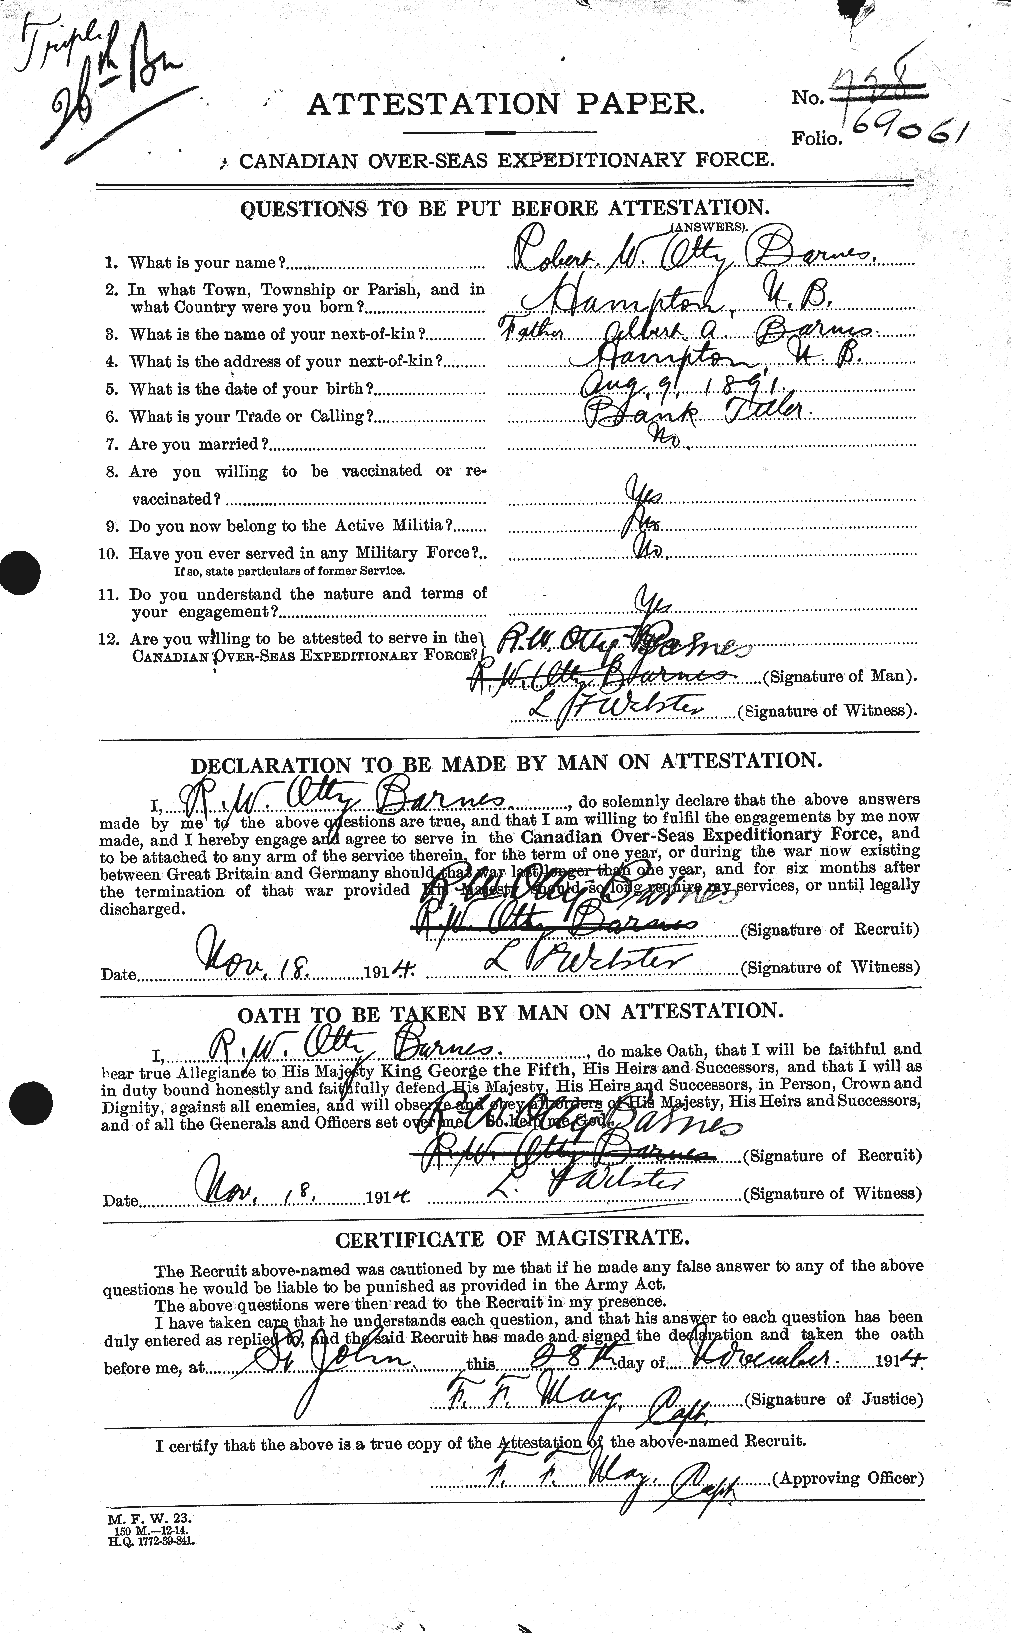 Personnel Records of the First World War - CEF 227372a